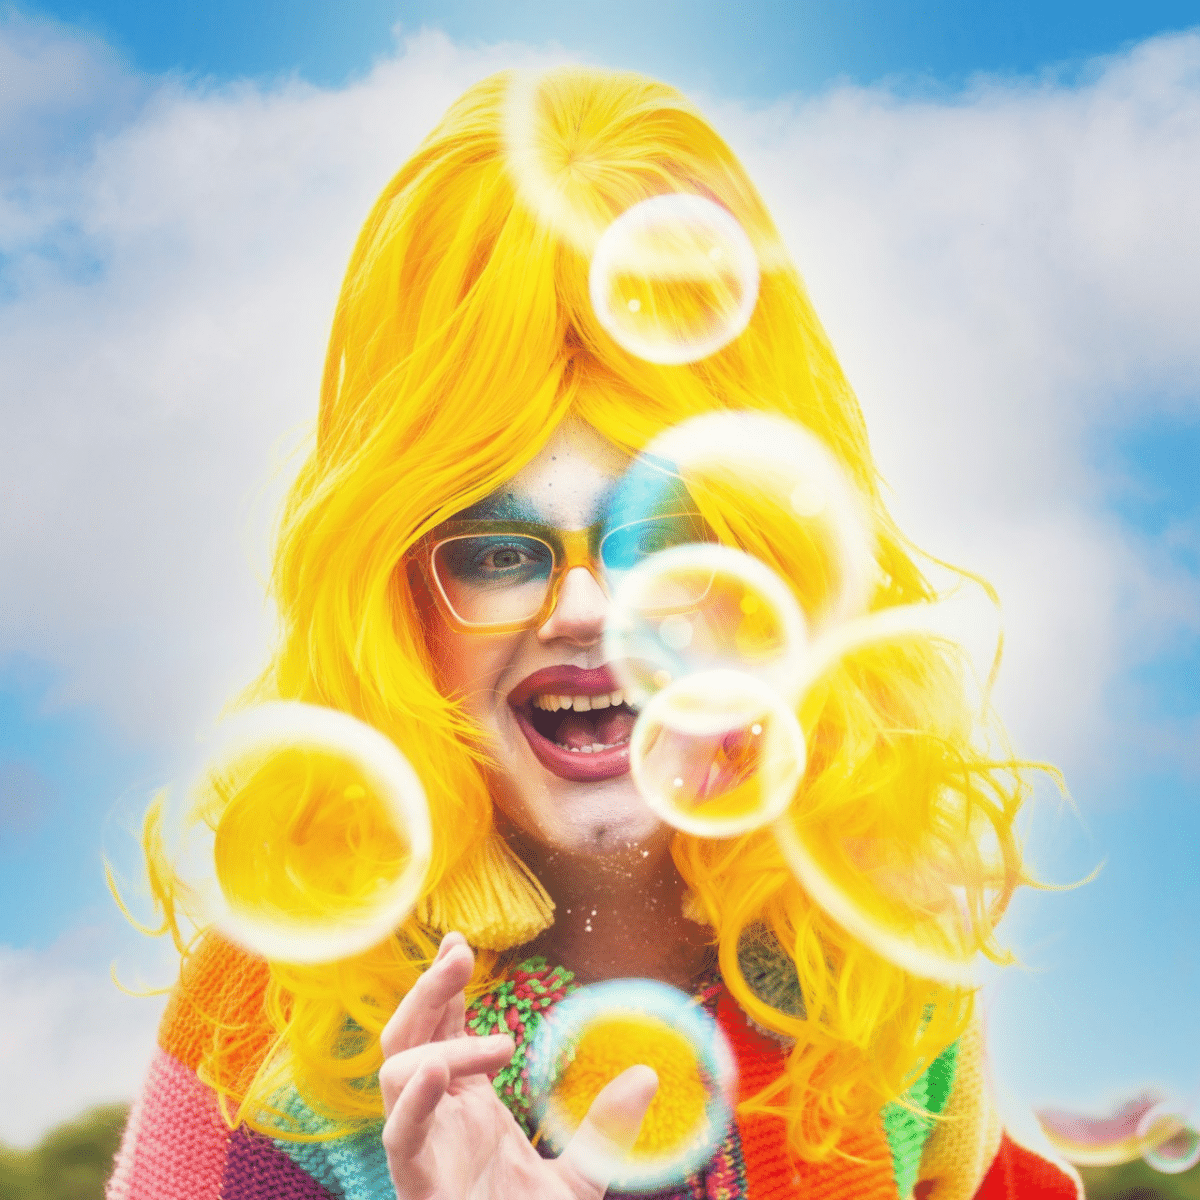 Drag performer smiles widely at the camera surrounded by soap bubbles.